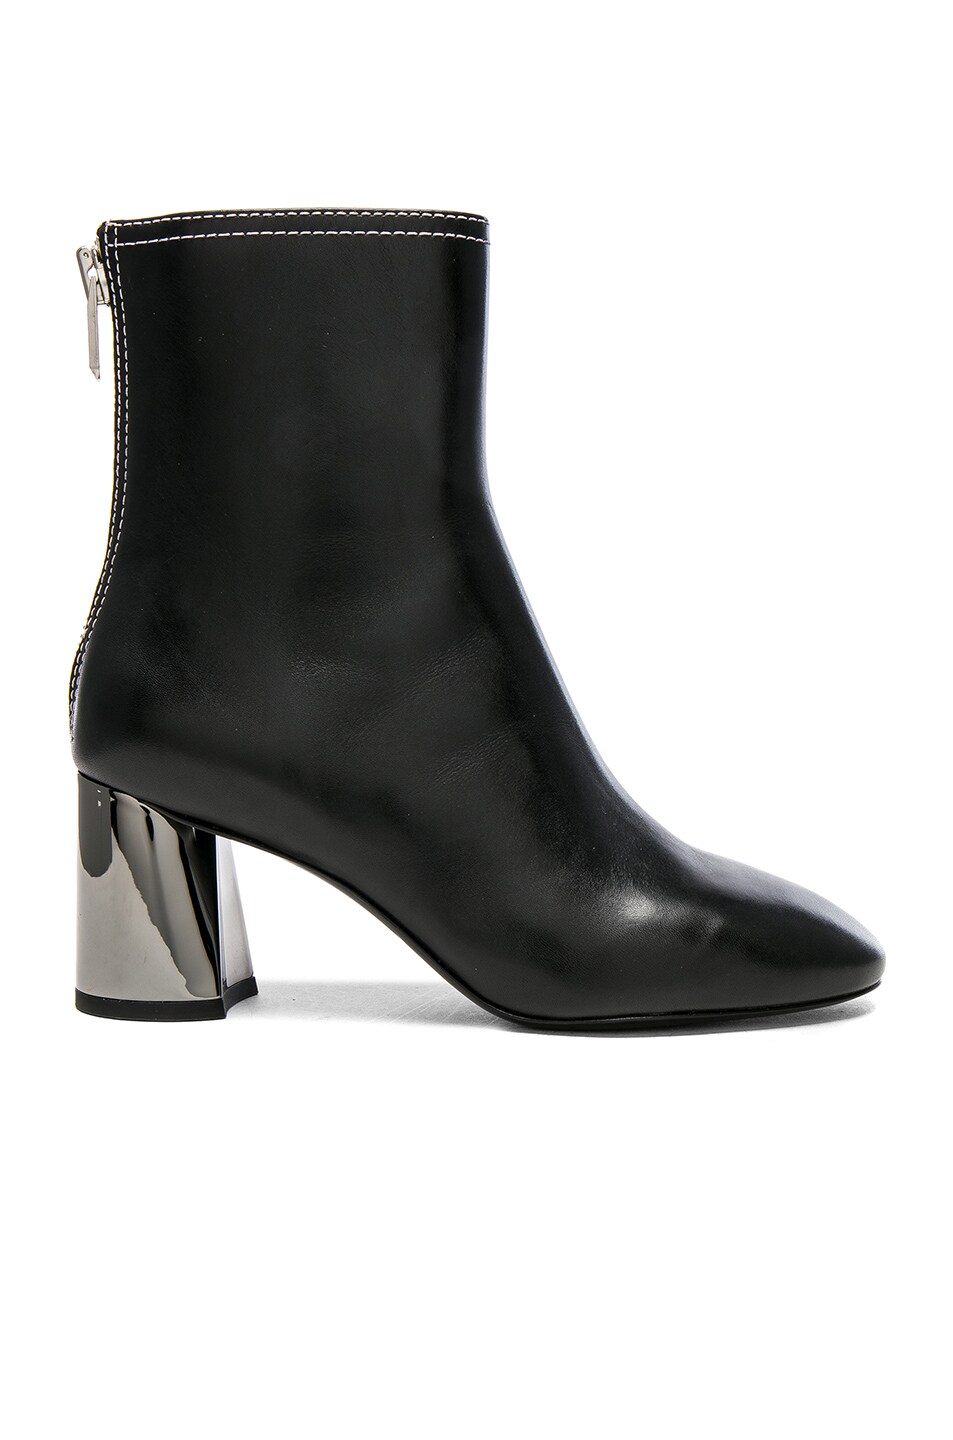 Image 1 of 3.1 phillip lim Leather Drum Boots in Black